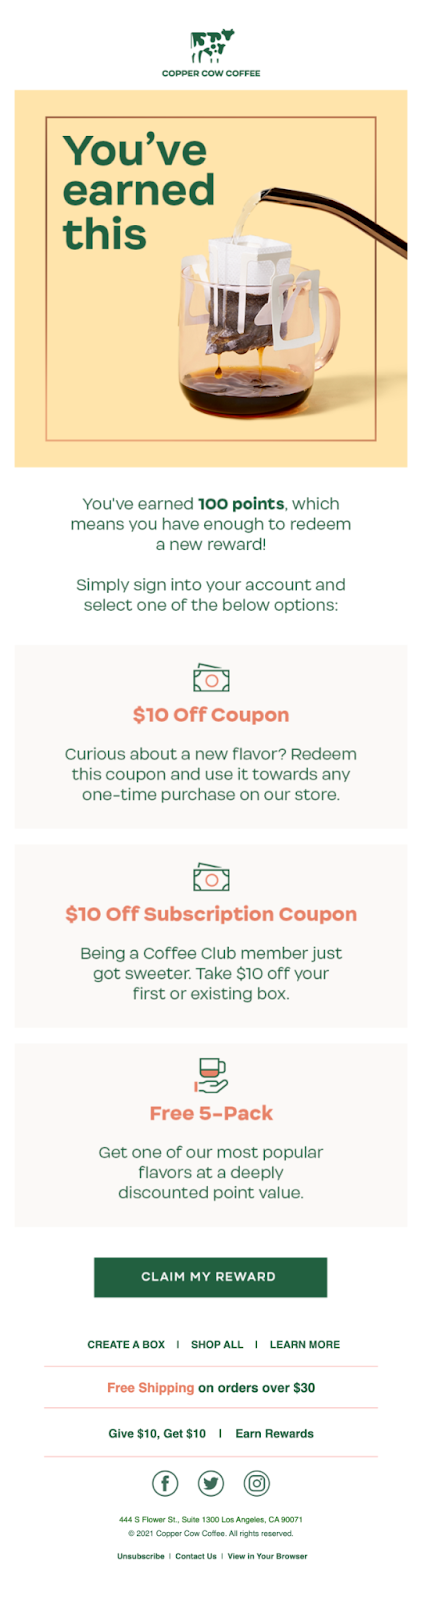 Best Loyalty Program Email Examples–A screenshot of Copper Cow Coffee's visual rewards redemption email. The email has a title of, "You've earned this" next to an image of coffee being poured into a clear mug. The email explains that the reader has 1000 points and then shows visual icons of 3 different rewards, "$10 Off Coupon", "$10 Off Subscription Coupon", and "Free 5–Pack". 